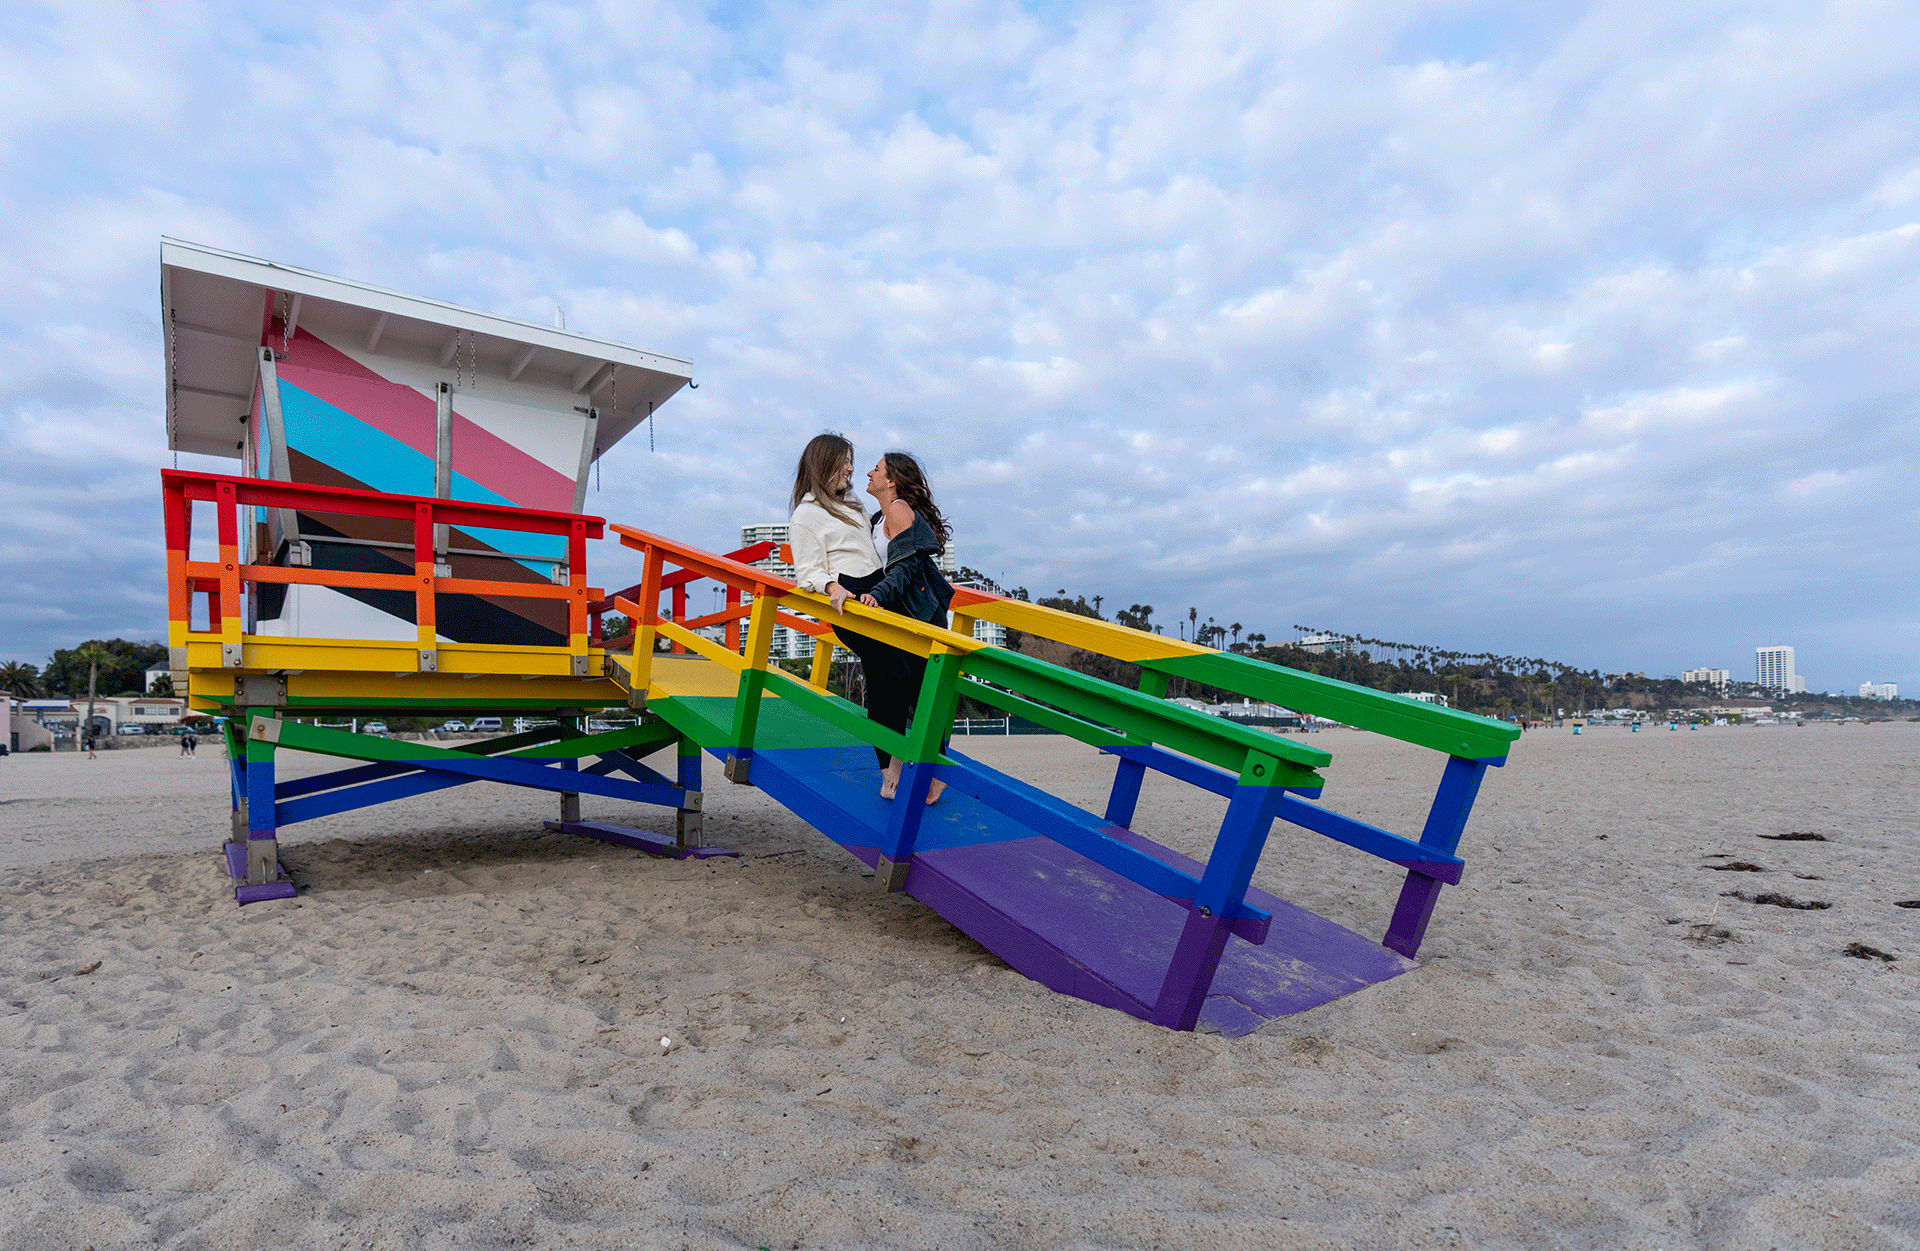 An LGBTQ+ couple embraces on a lifeguard tower painted in Pride colors at Ginger Rogers beach.